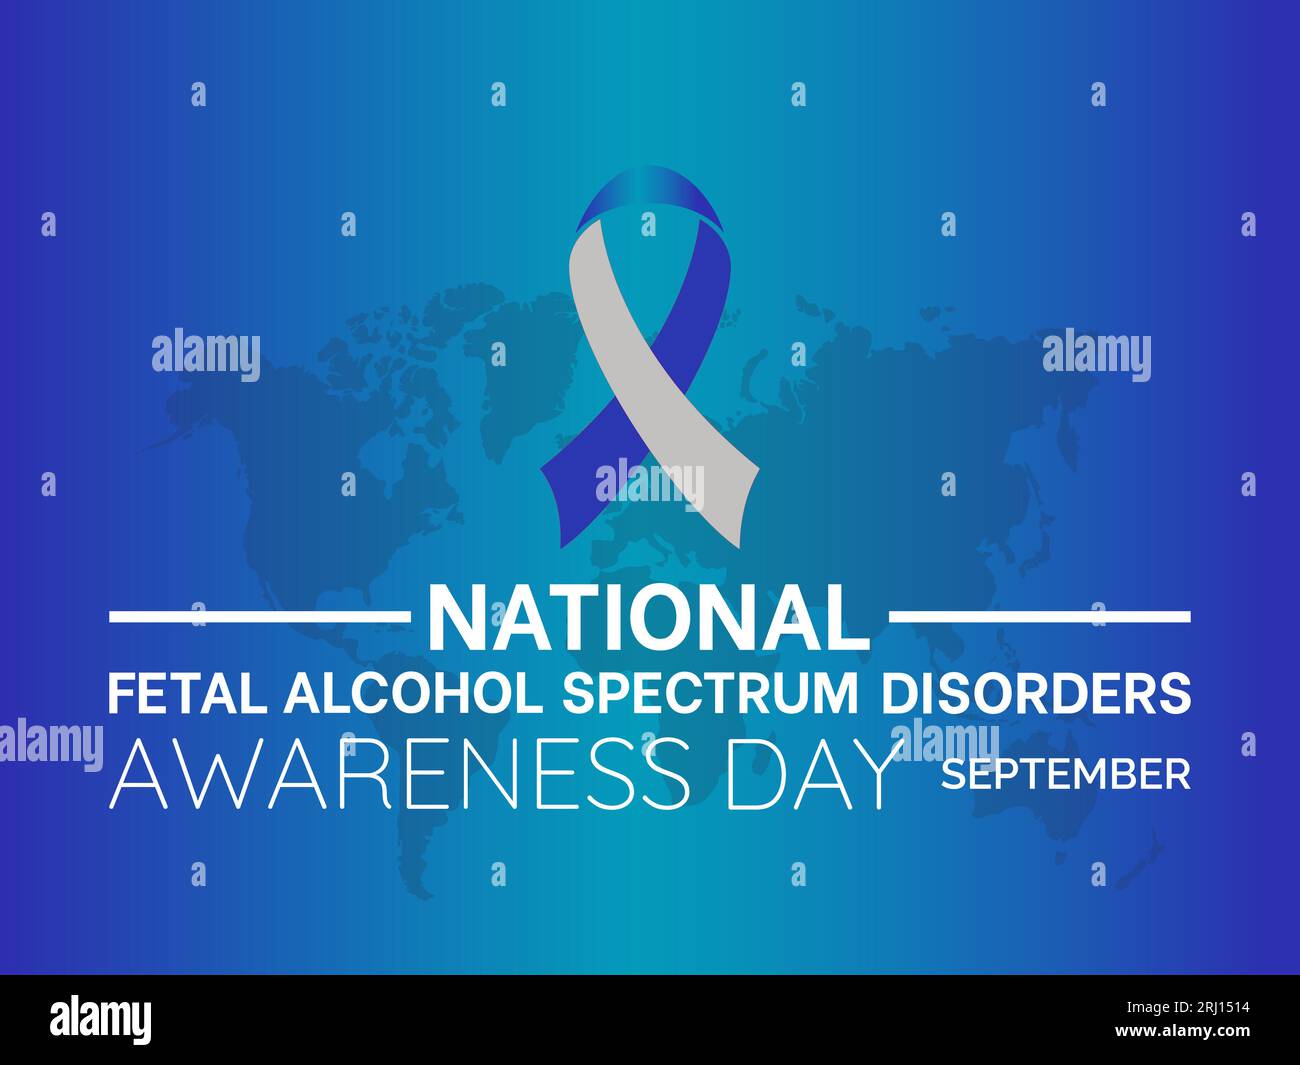 National Fetal Alcohol Spectrum Disorders (FASD) Awareness Day Raises Compassion, Education, and Hope. Shining Light on Preventable Harm vector illust Stock Vector